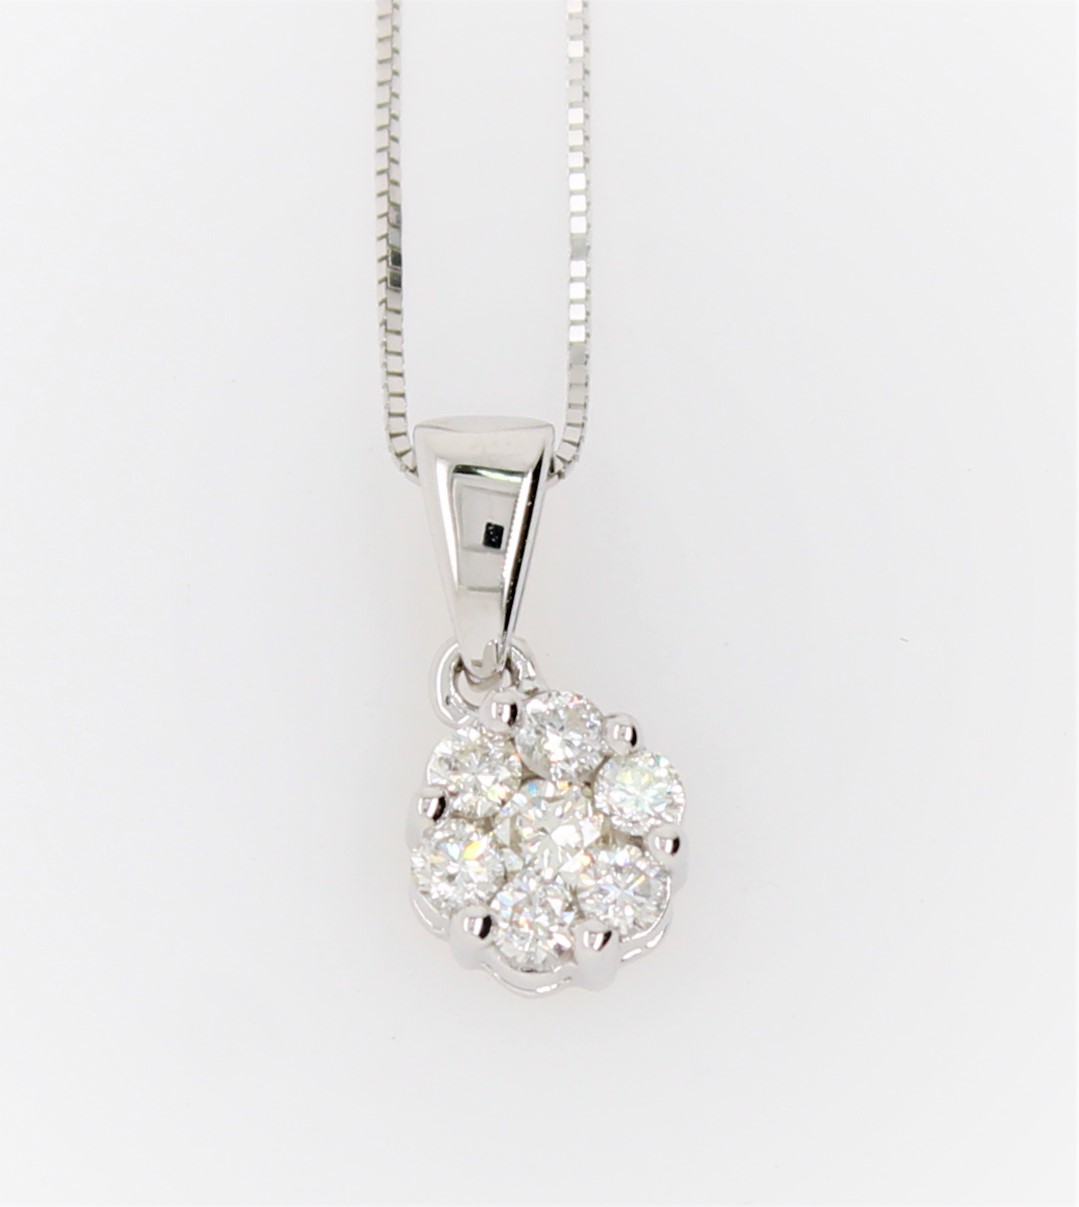 10 Karat White Gold Diamond Cluster Pendant Necklace In The .25 Carat Category